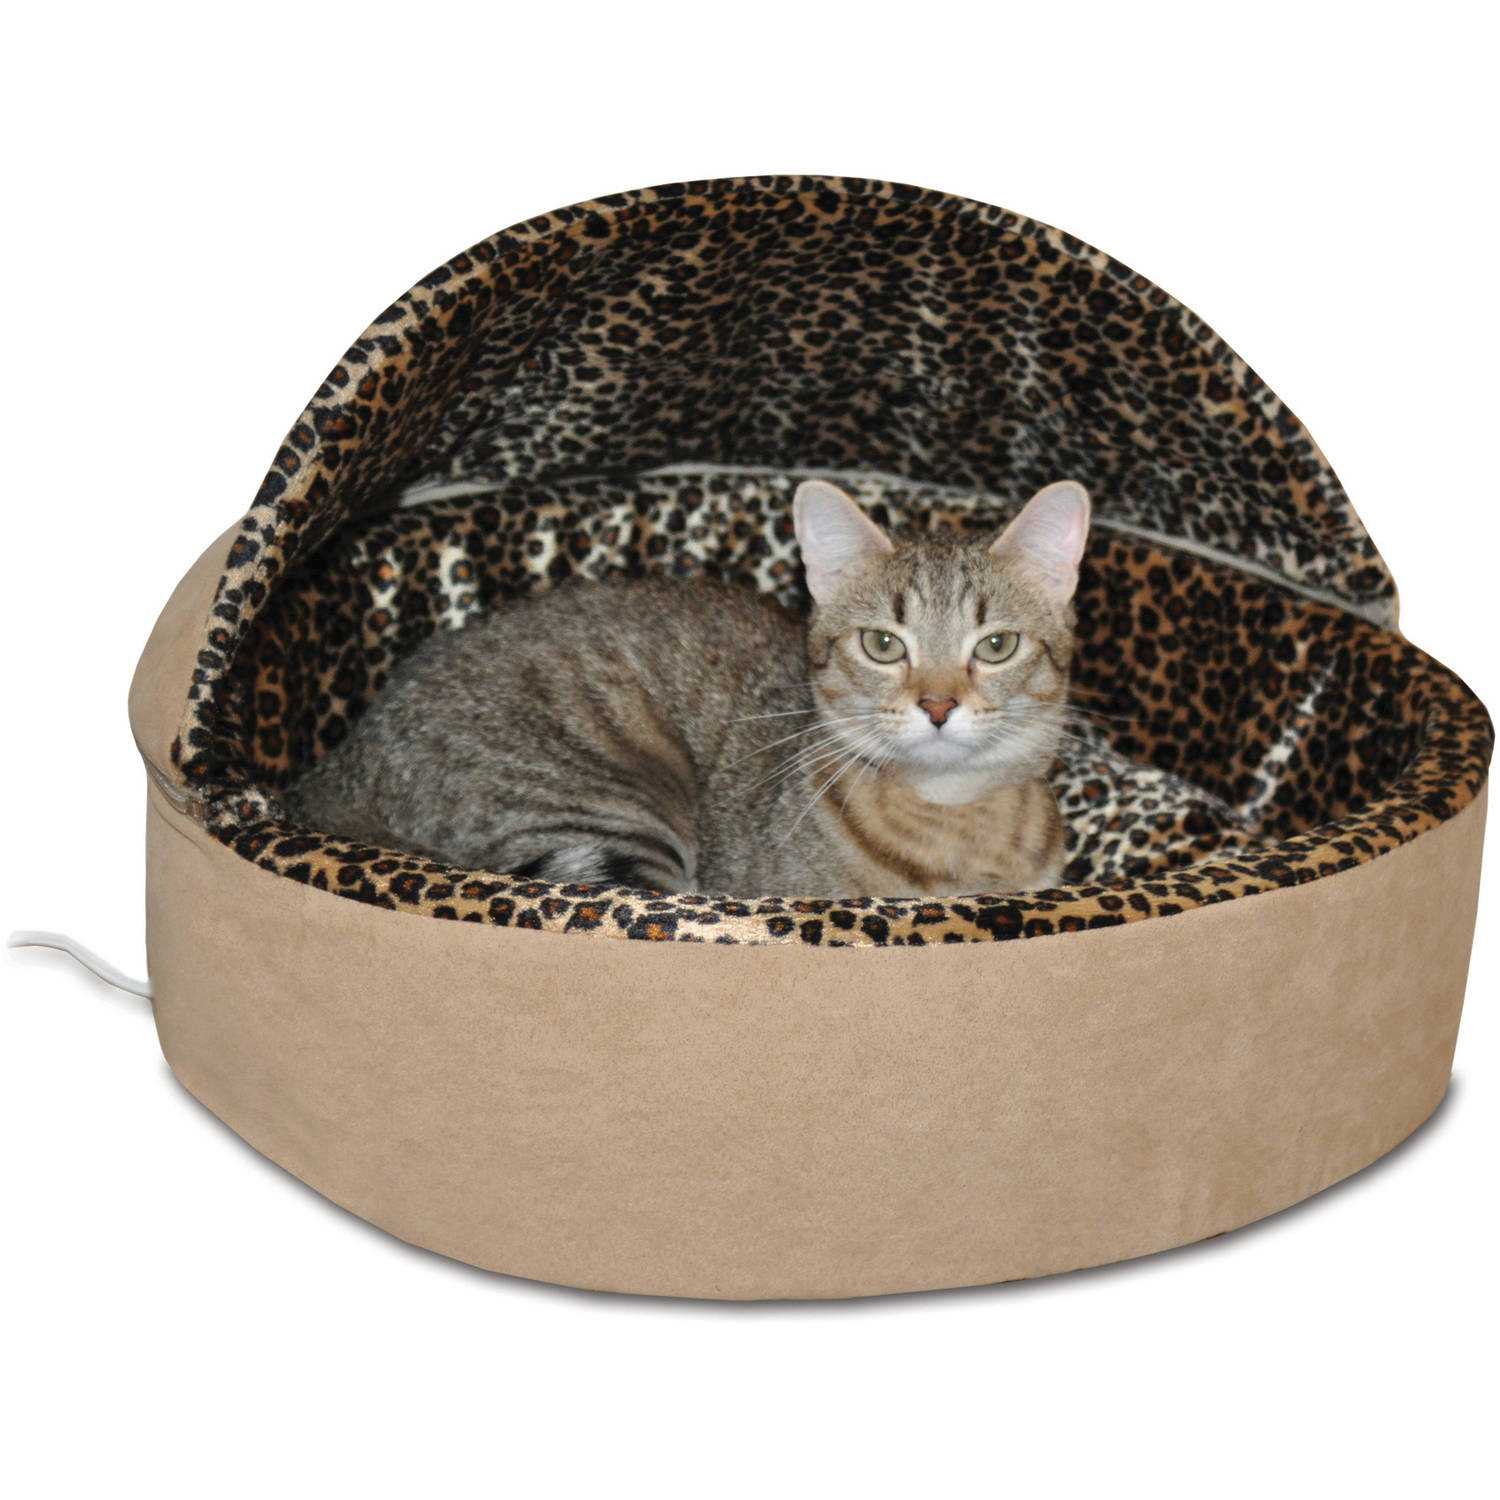 Tiger Print Thermo-Kitty Heated Cat Bed by K&H